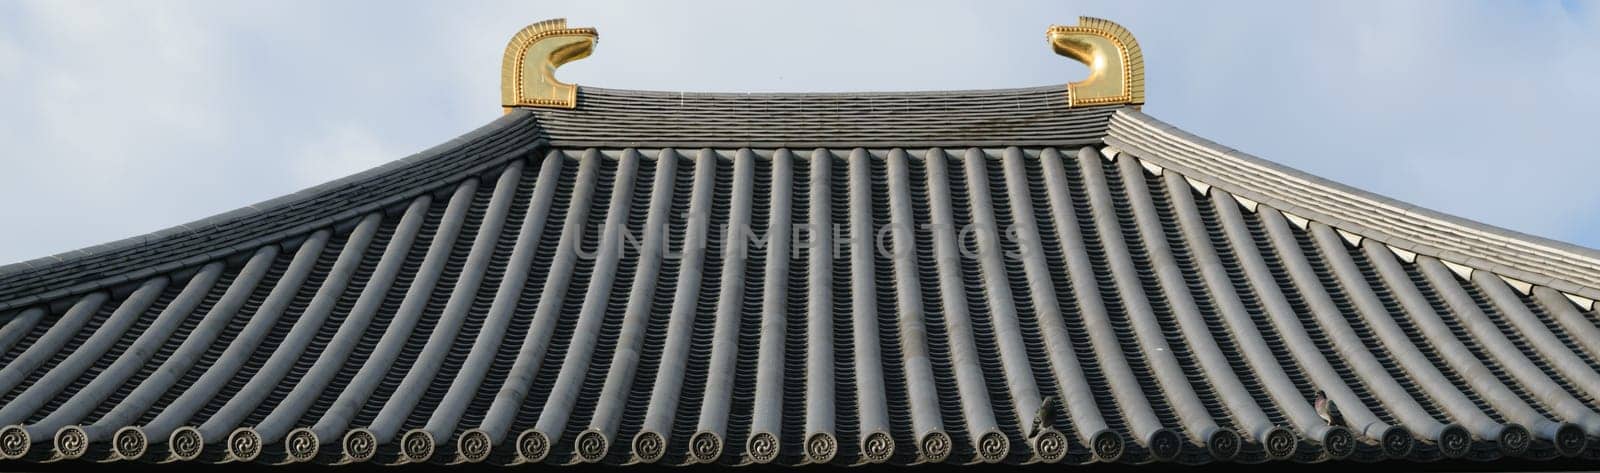 Close-up of a traditional Japanese temple roof with ornate golden decorations against a blue sky.